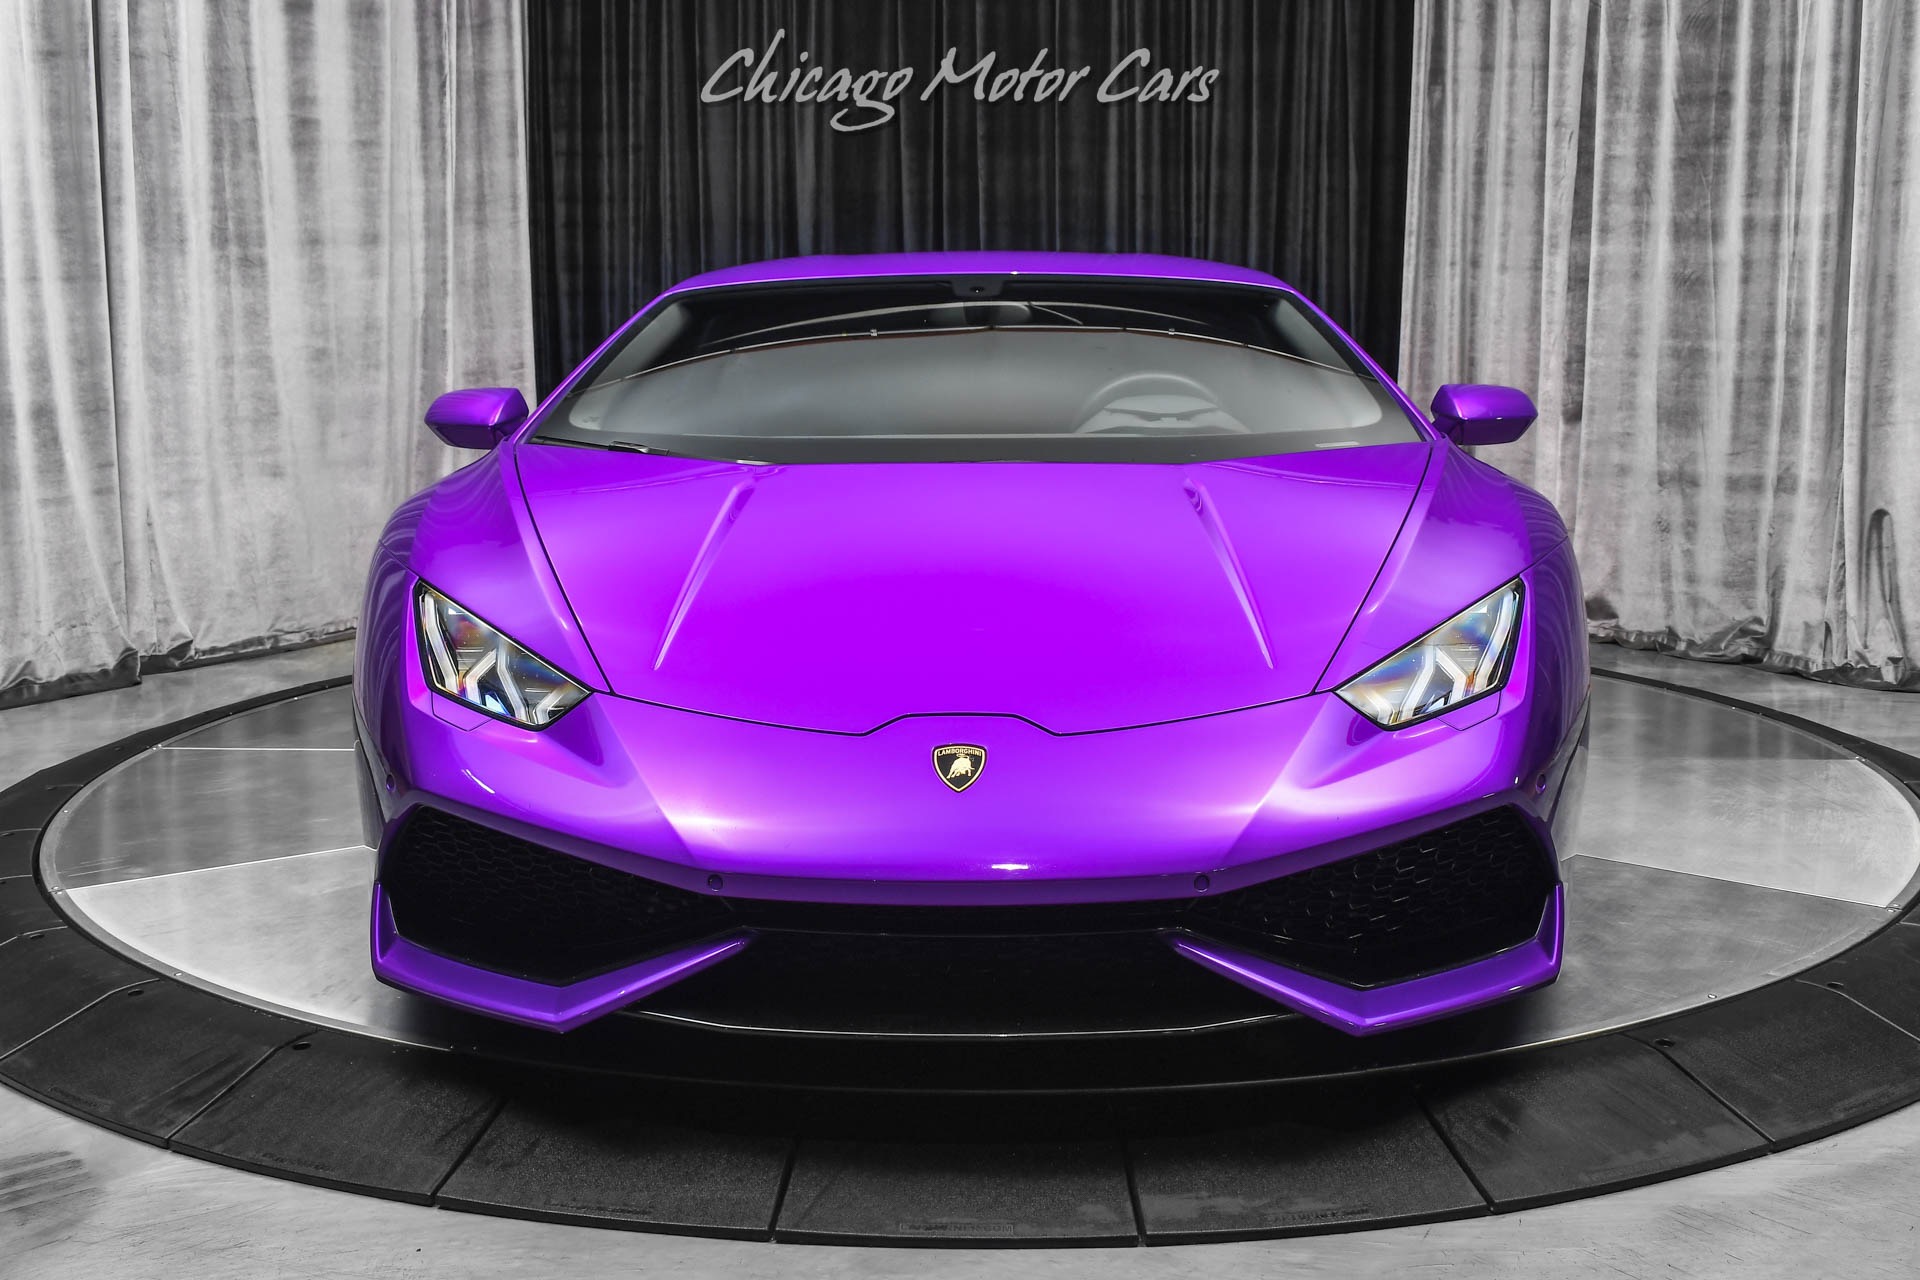 Used 2017 Lamborghini Huracan LP610-4 Coupe LOW Miles! RARE Viola Parsifae!  HOT Spec! FULL PPF! For Sale (Special Pricing) | Chicago Motor Cars Stock  #19553